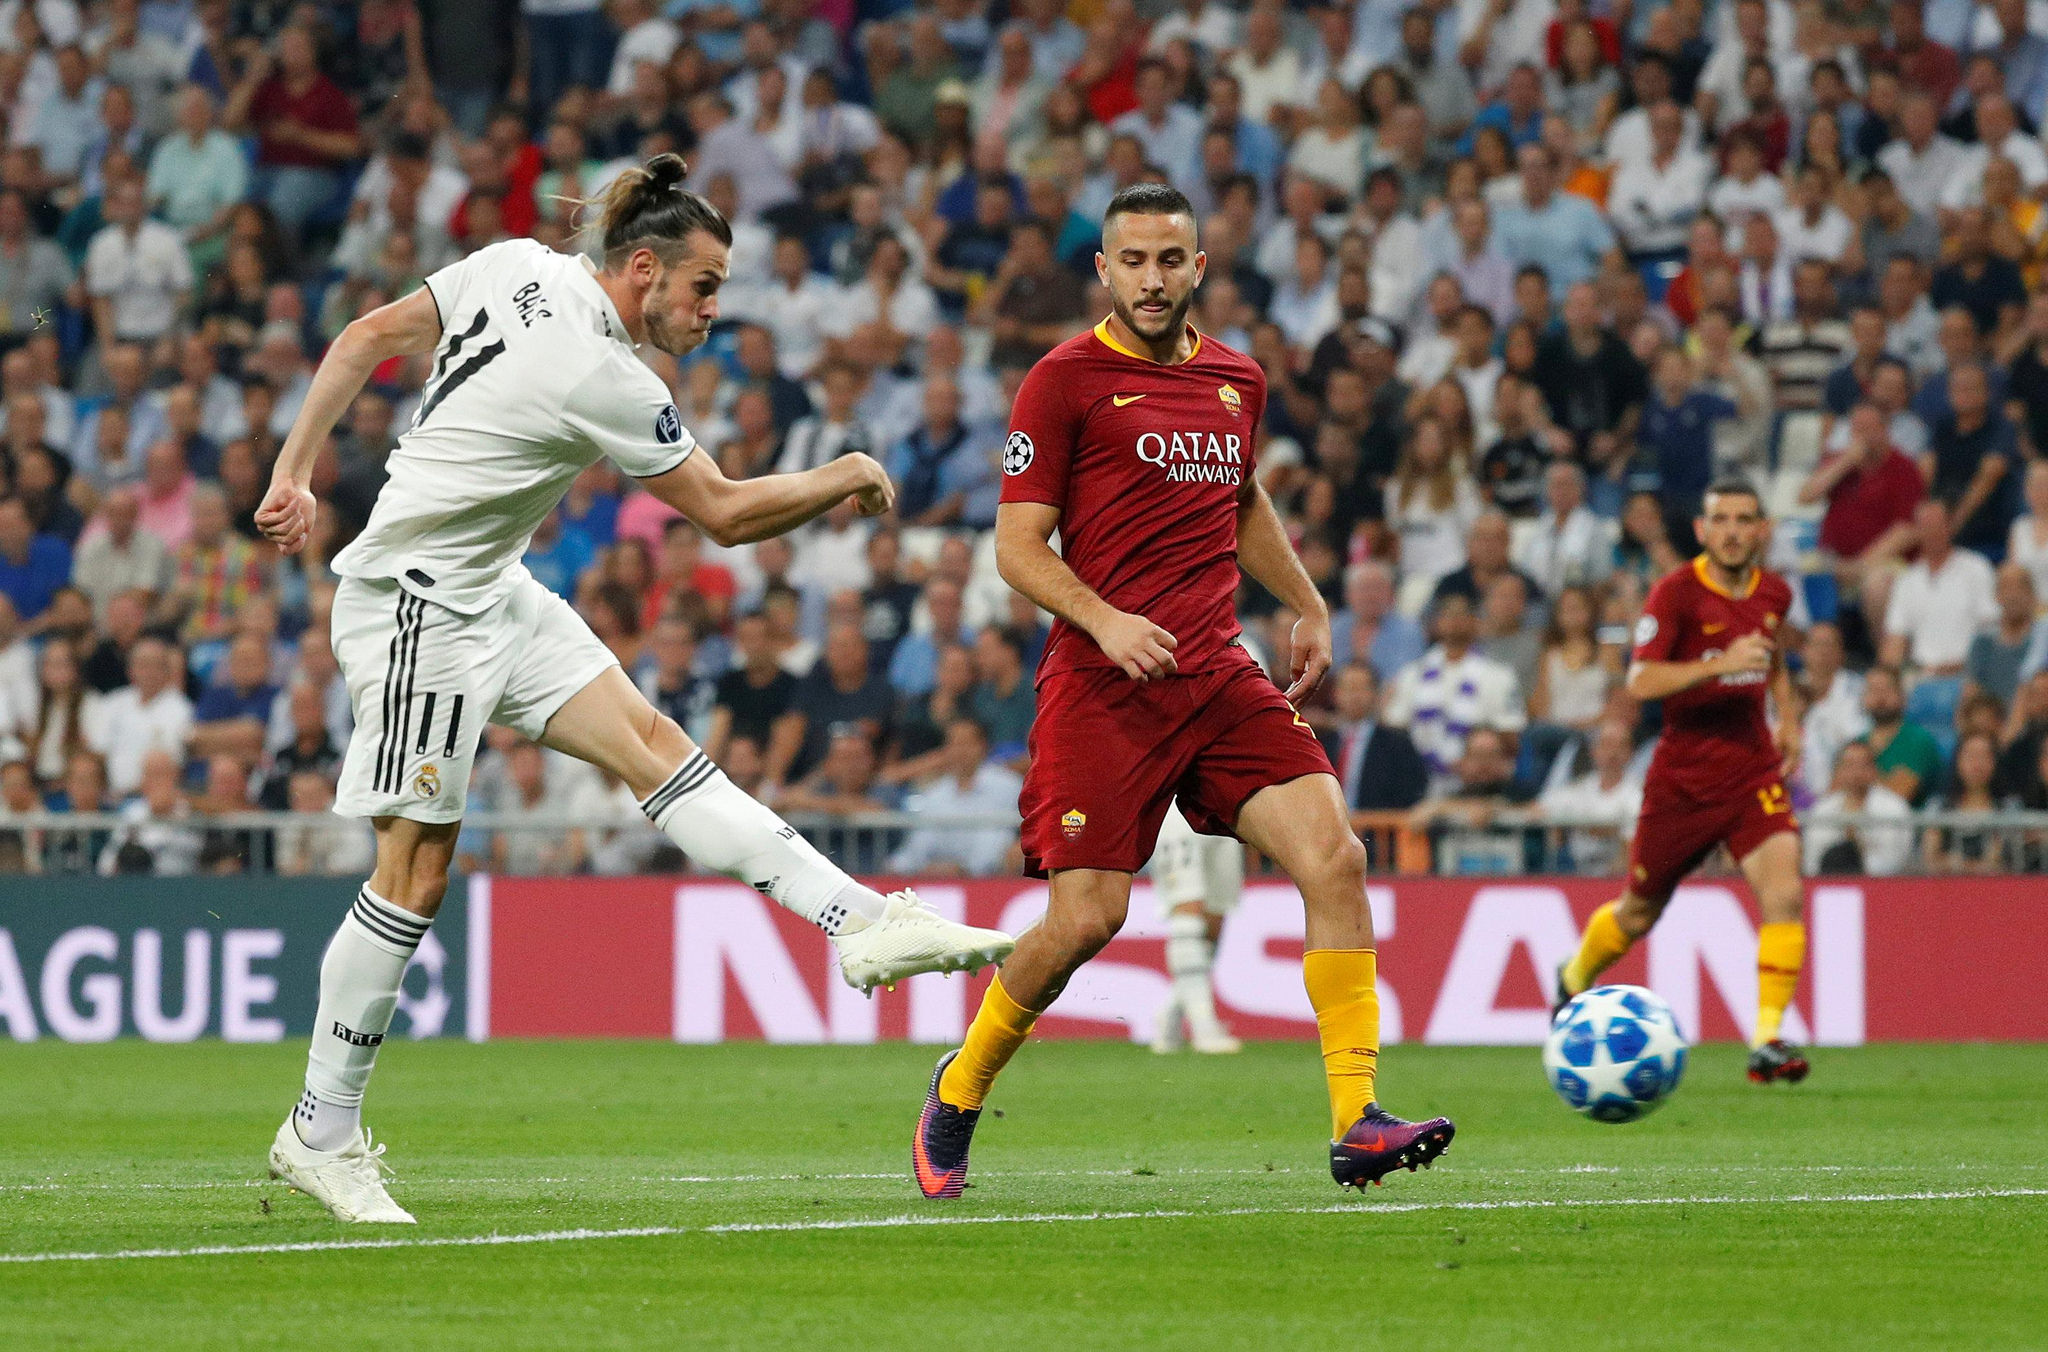 UCL: AS Roma vs Real Madrid Preview